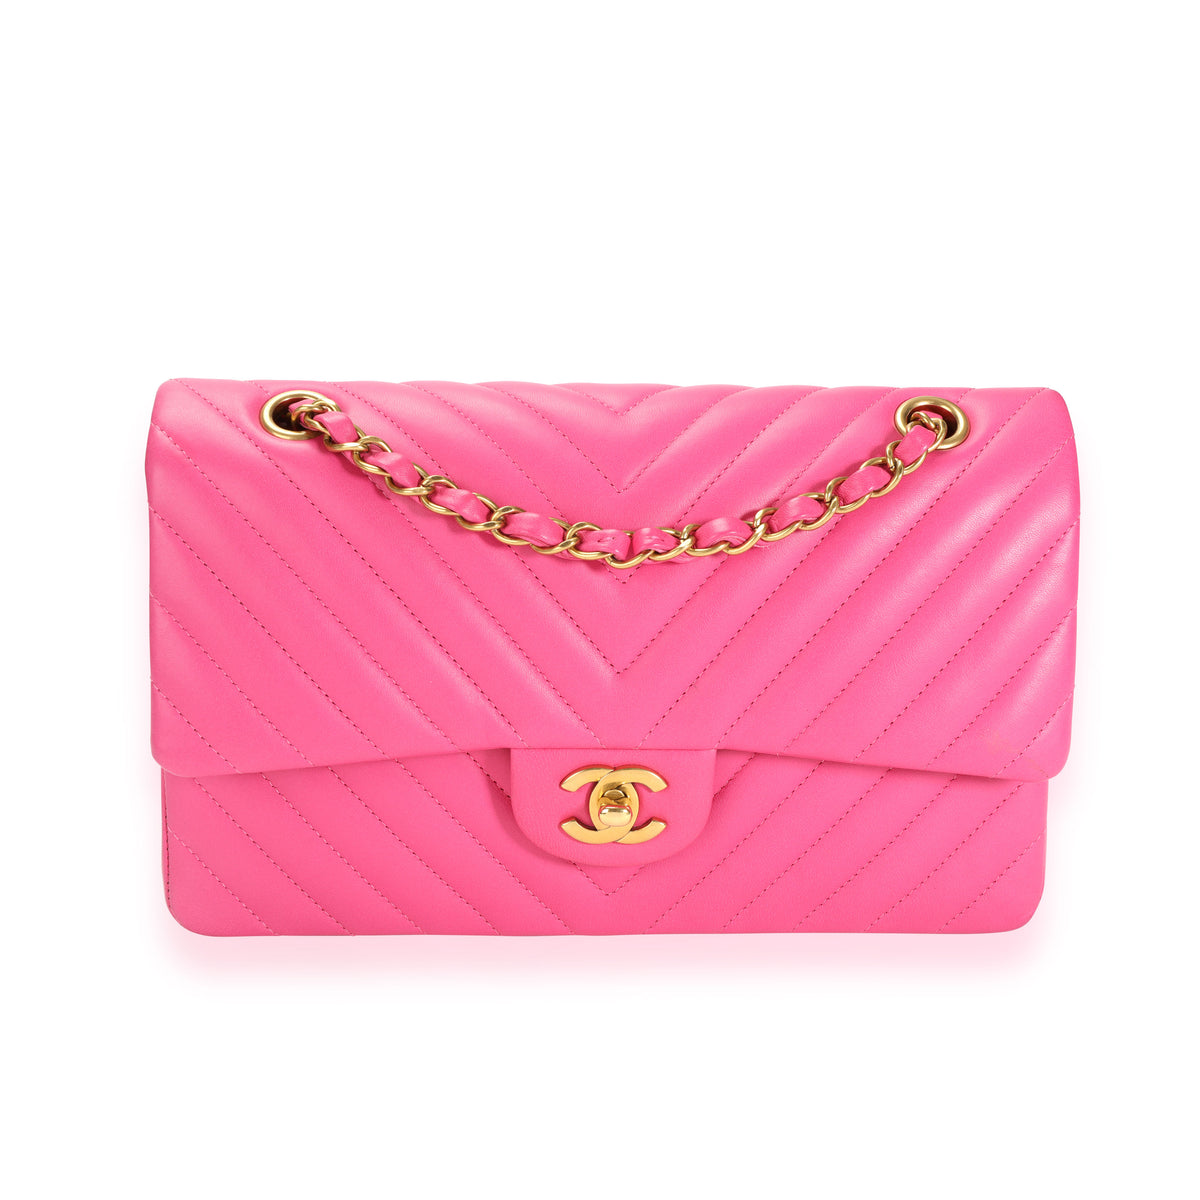 Chanel Mini Flap Bag With Top Handle Light Pink in Lambskin Leather  US